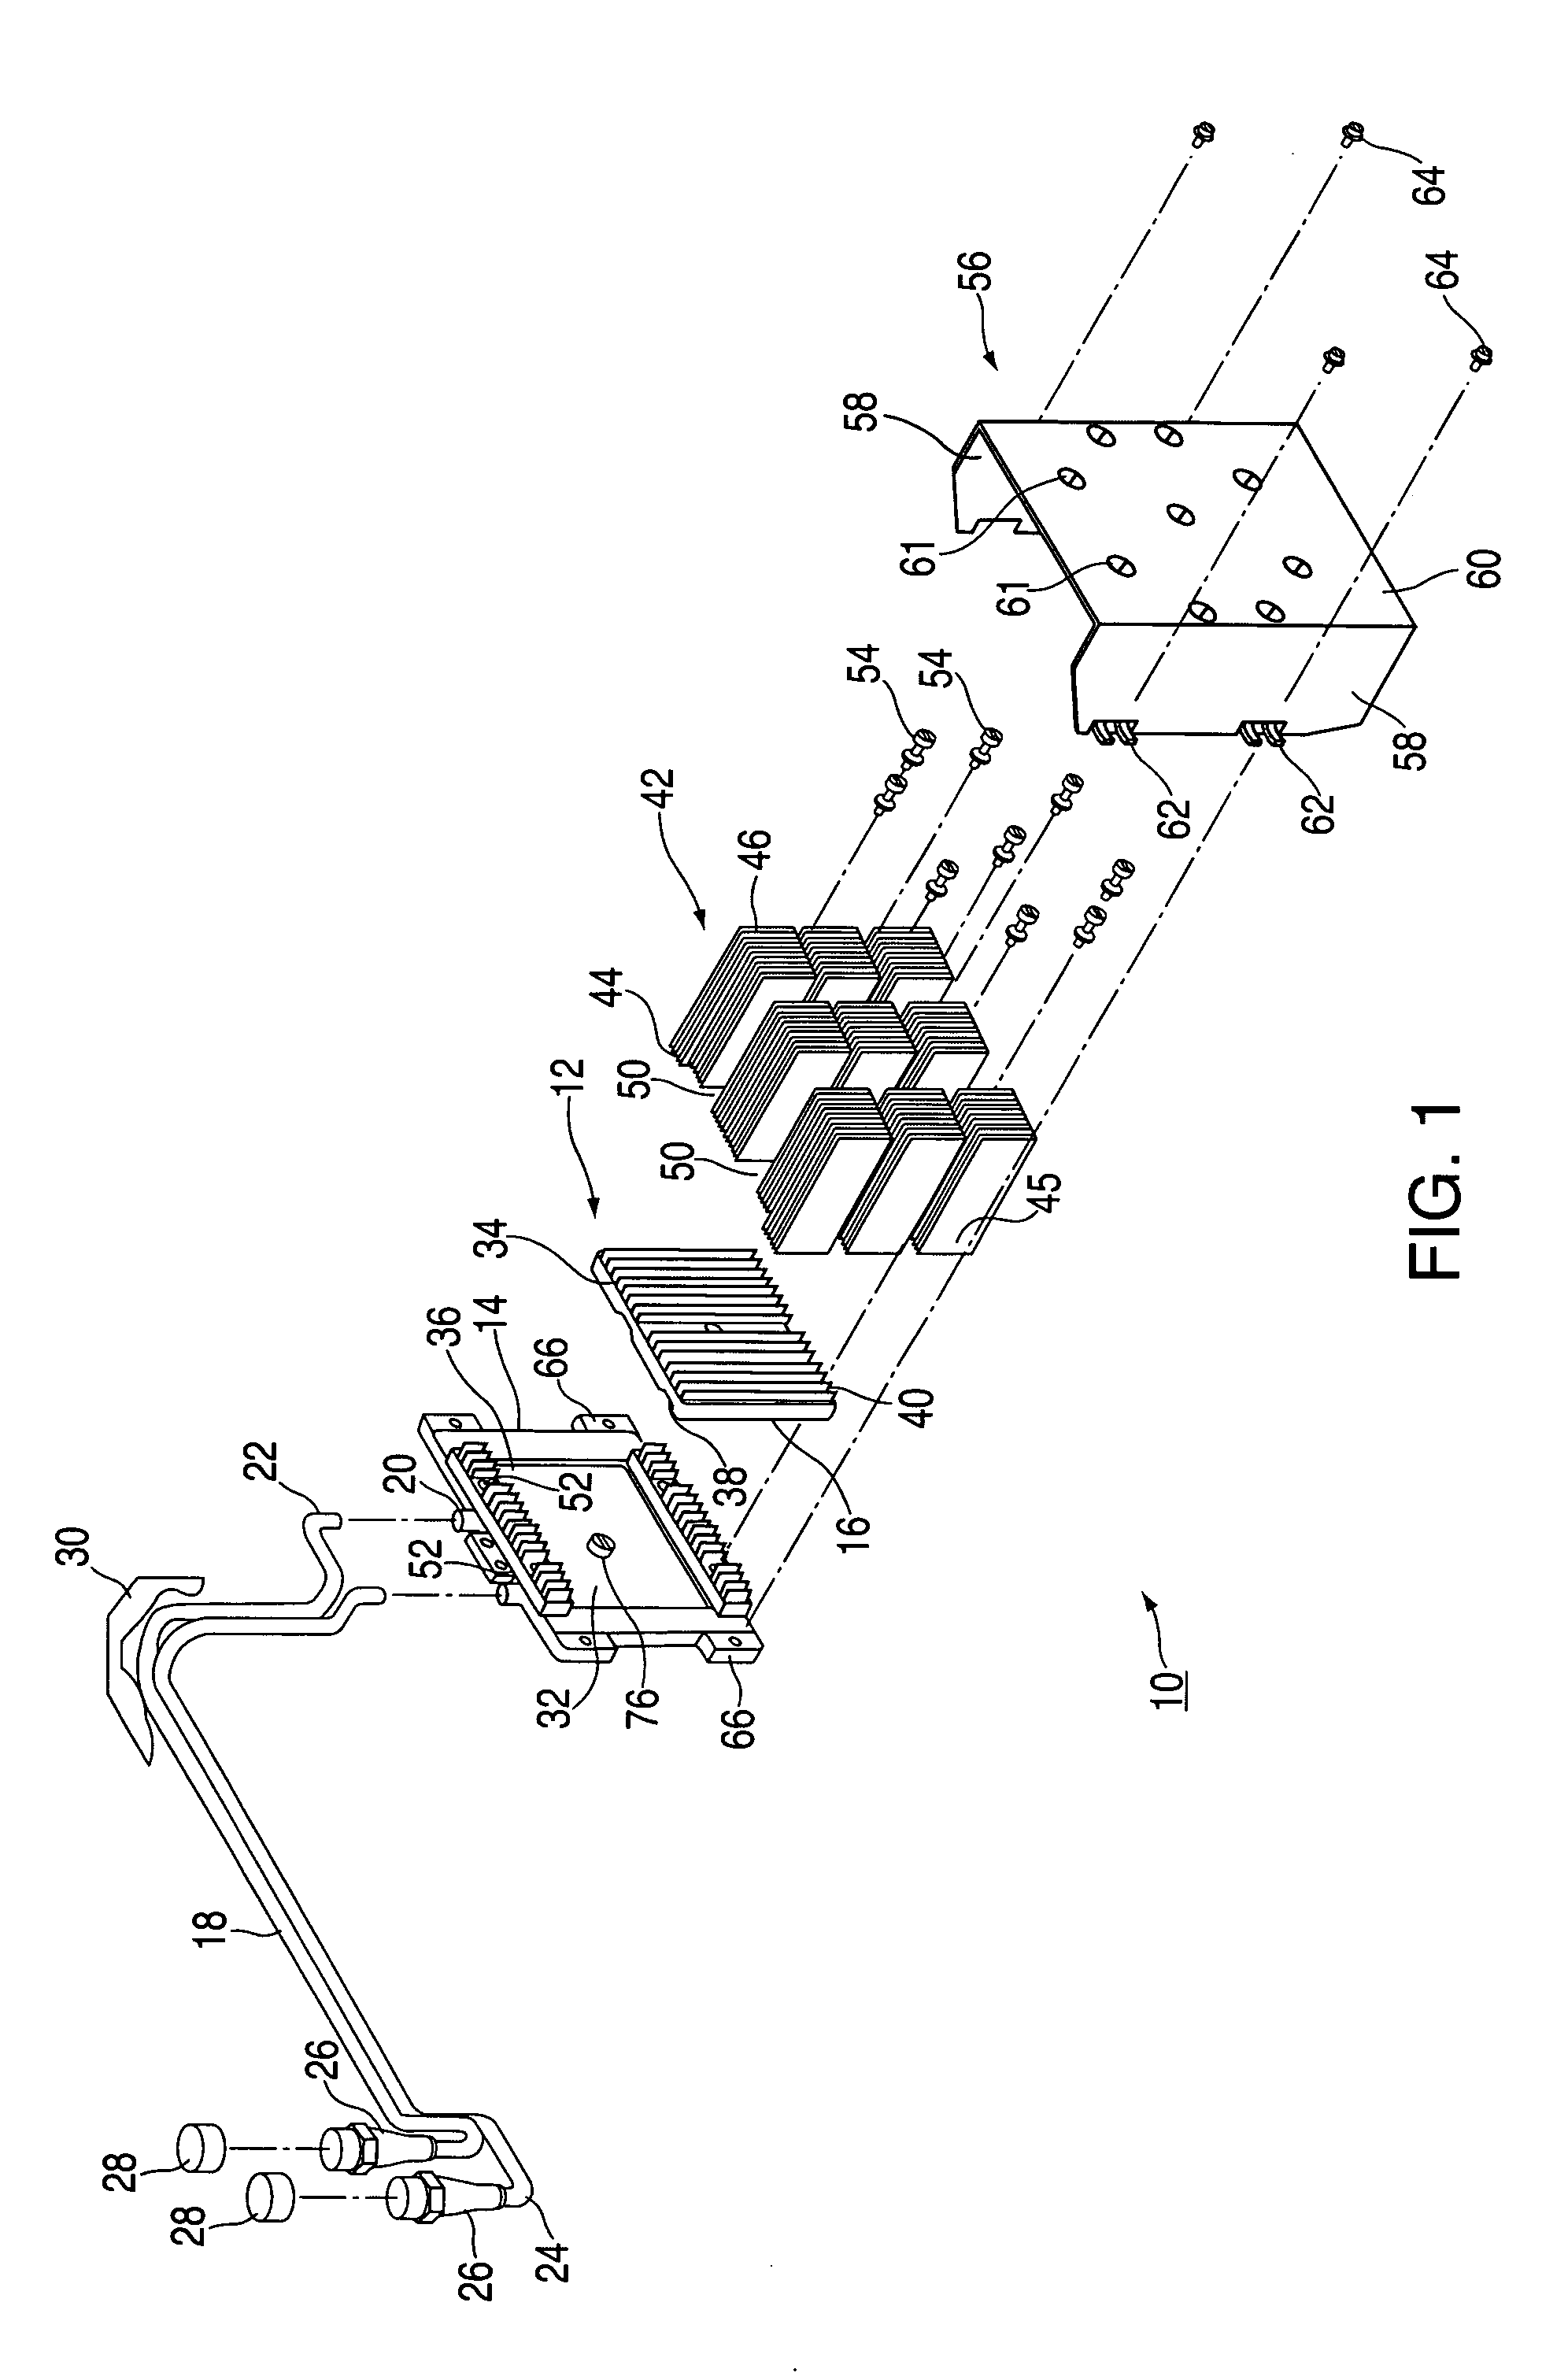 System and method for cooling multiple logic modules